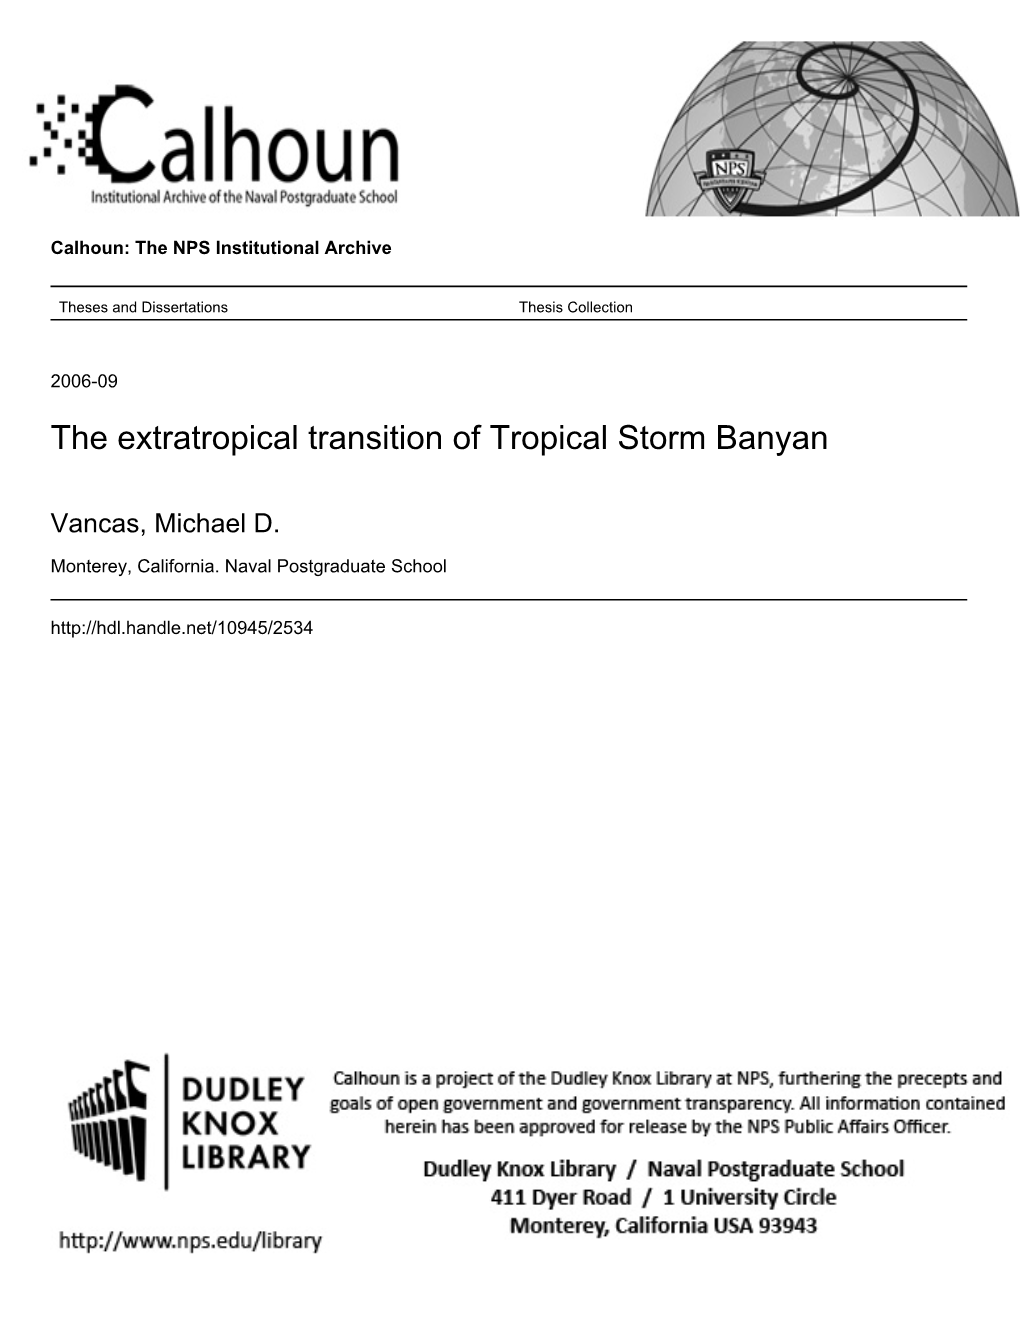 The Extratropical Transition of Tropical Storm Banyan